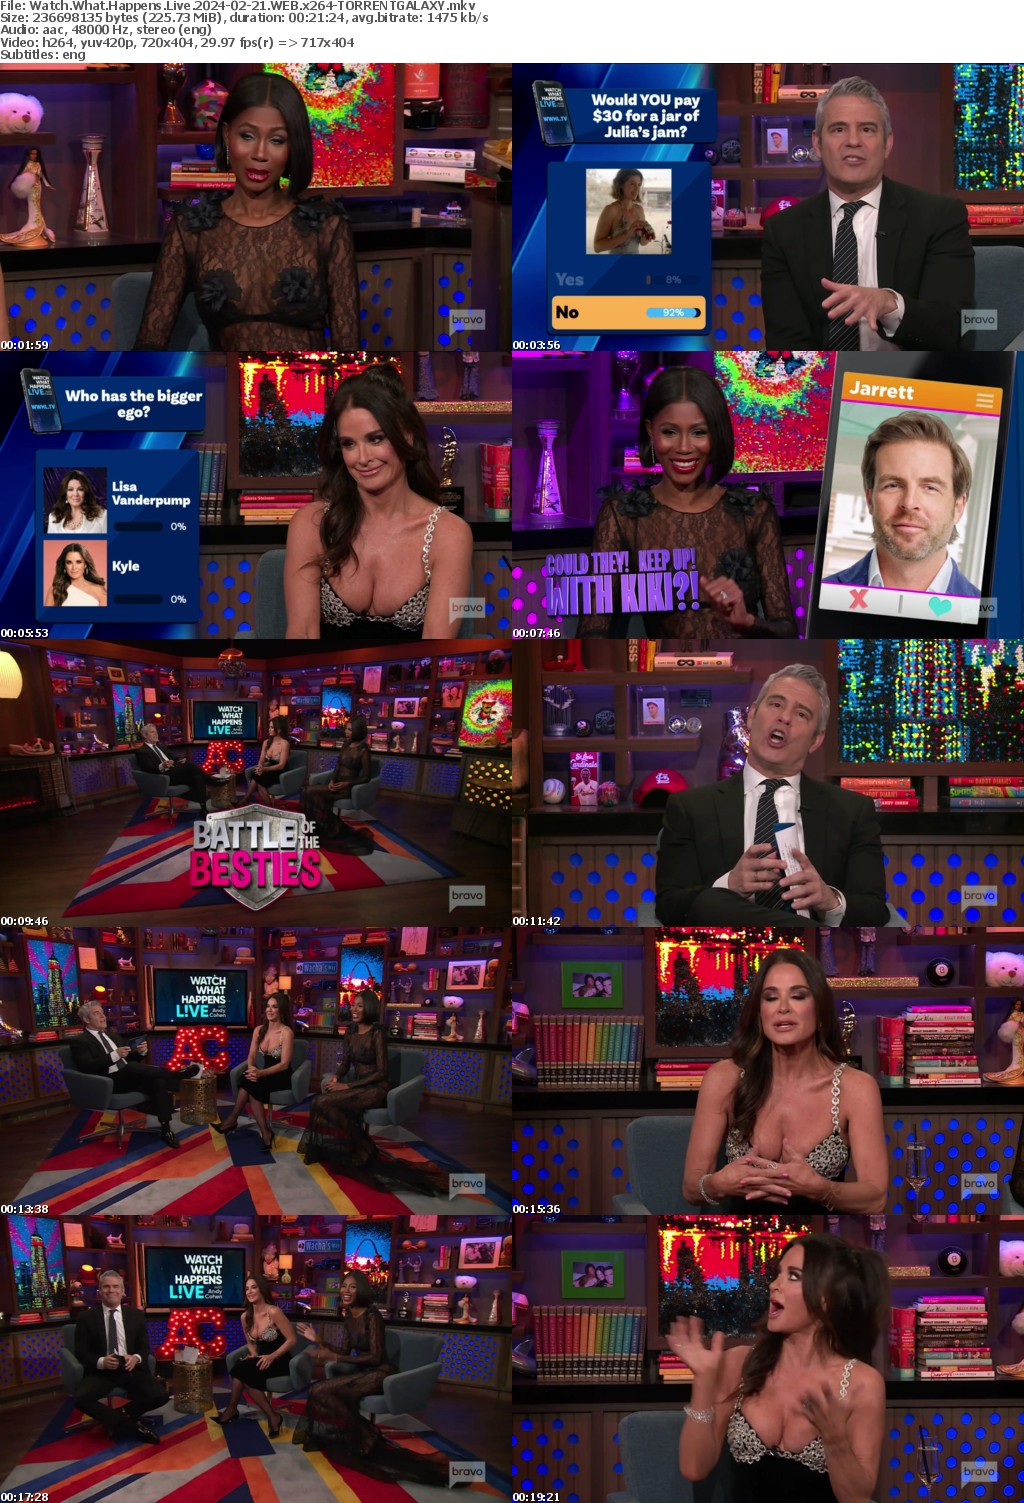 Watch What Happens Live 2024-02-21 WEB x264-GALAXY